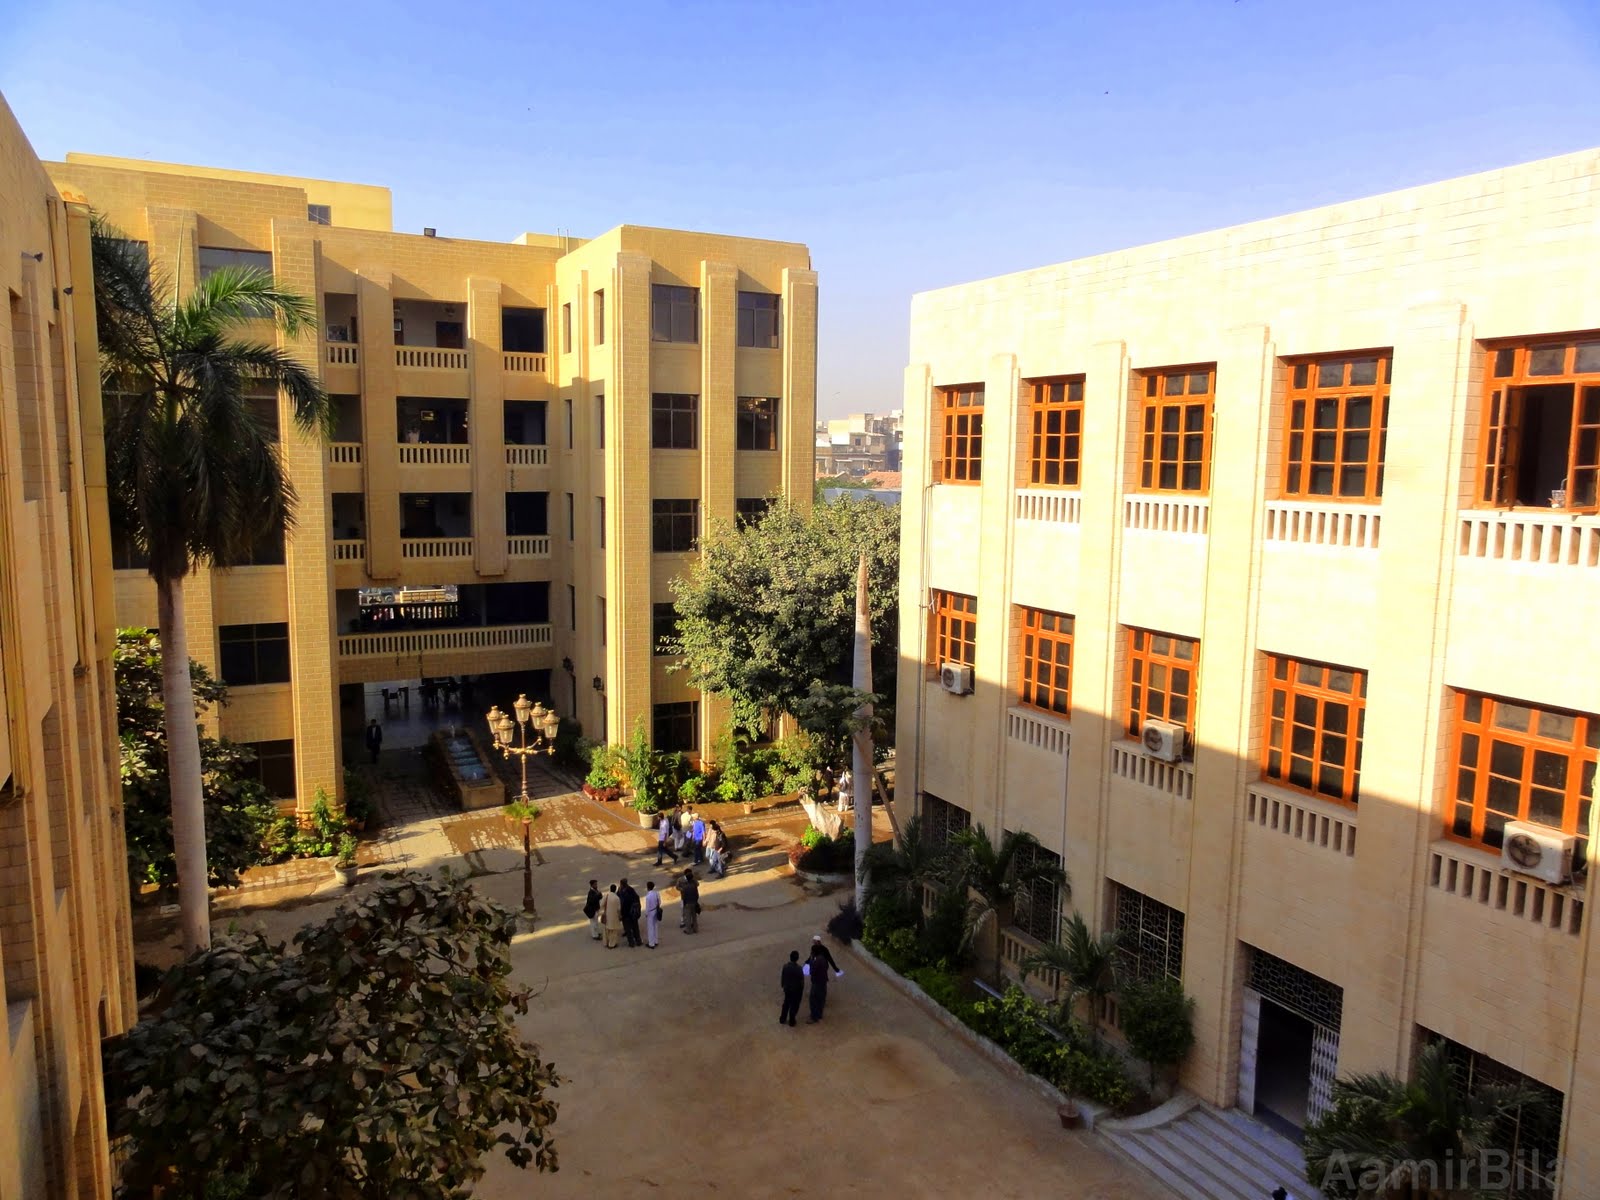 dow-medical-college